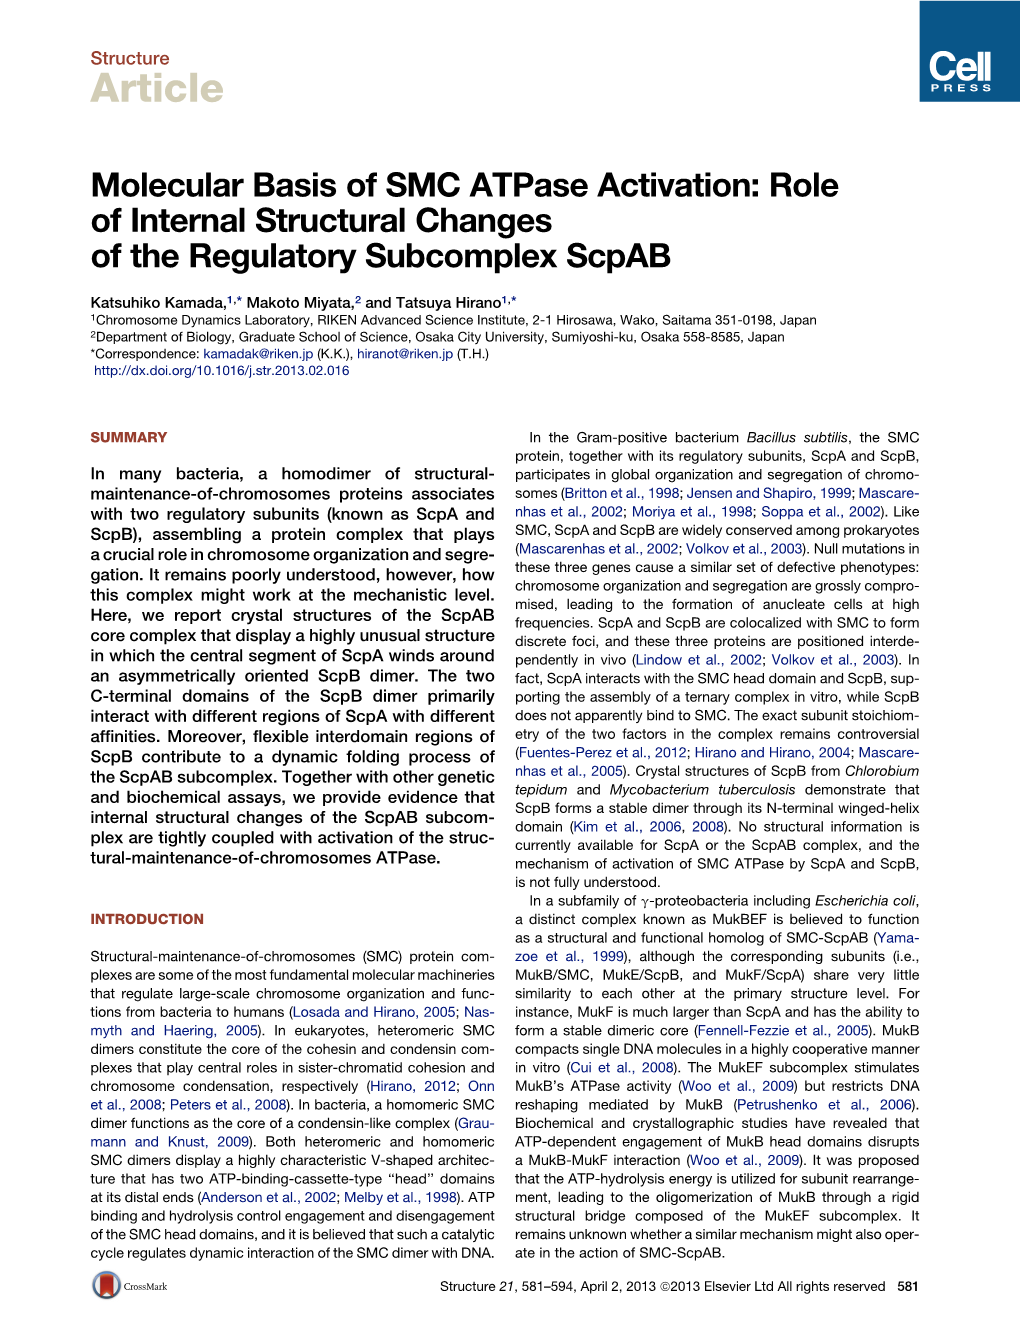 Molecular Basis of SMC Atpase Activation: Role of Internal Structural Changes of the Regulatory Subcomplex Scpab